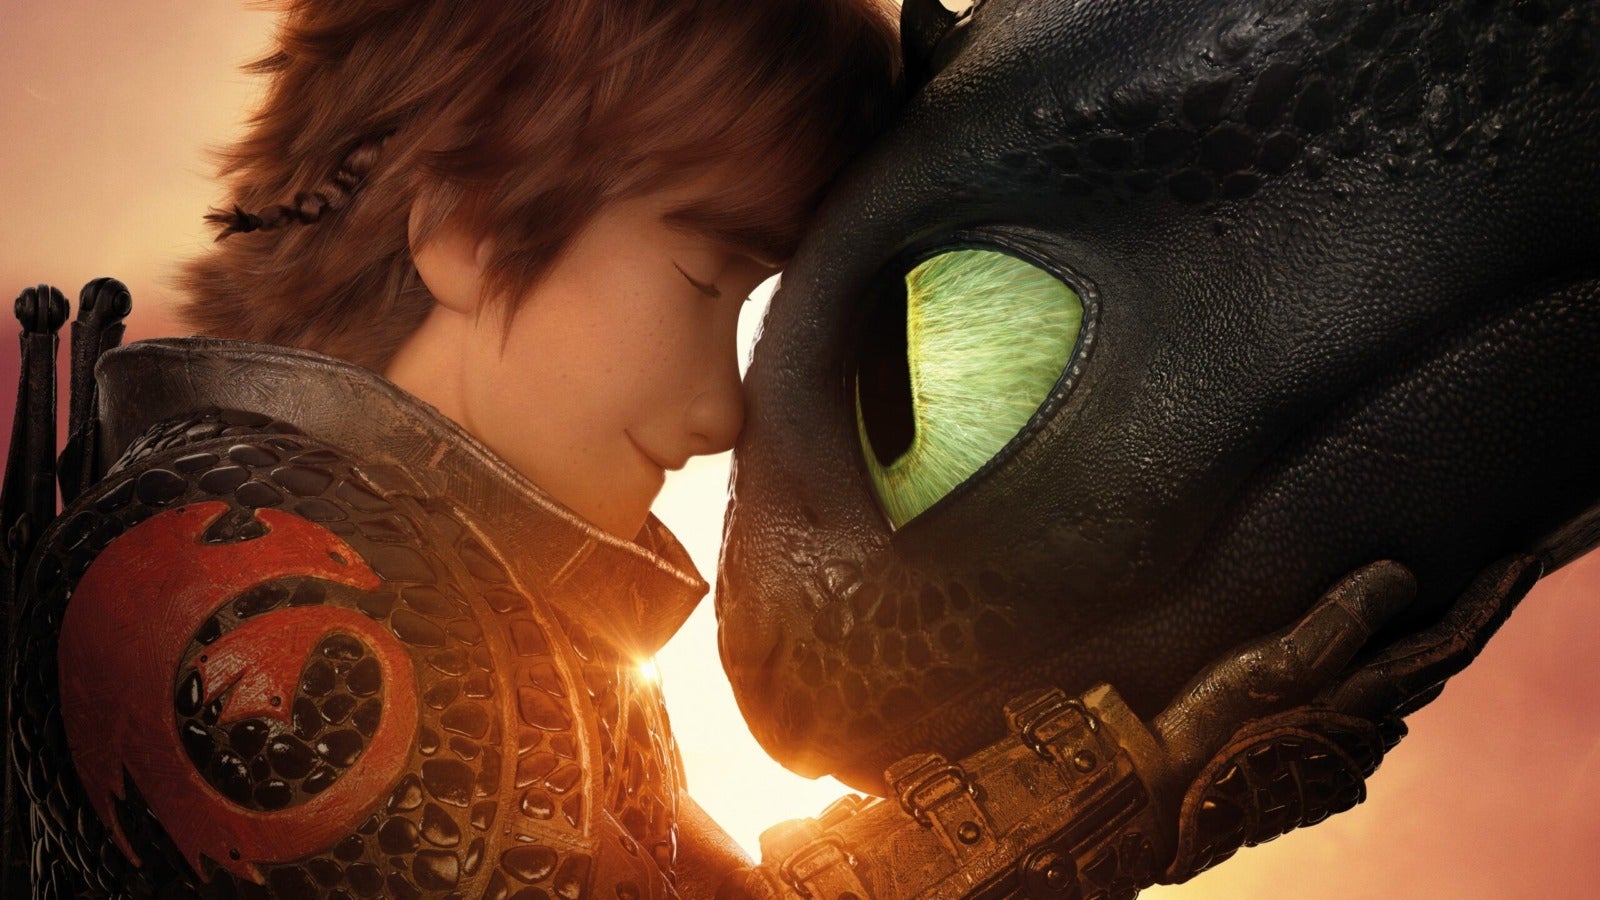 How To train Your Dragon 2